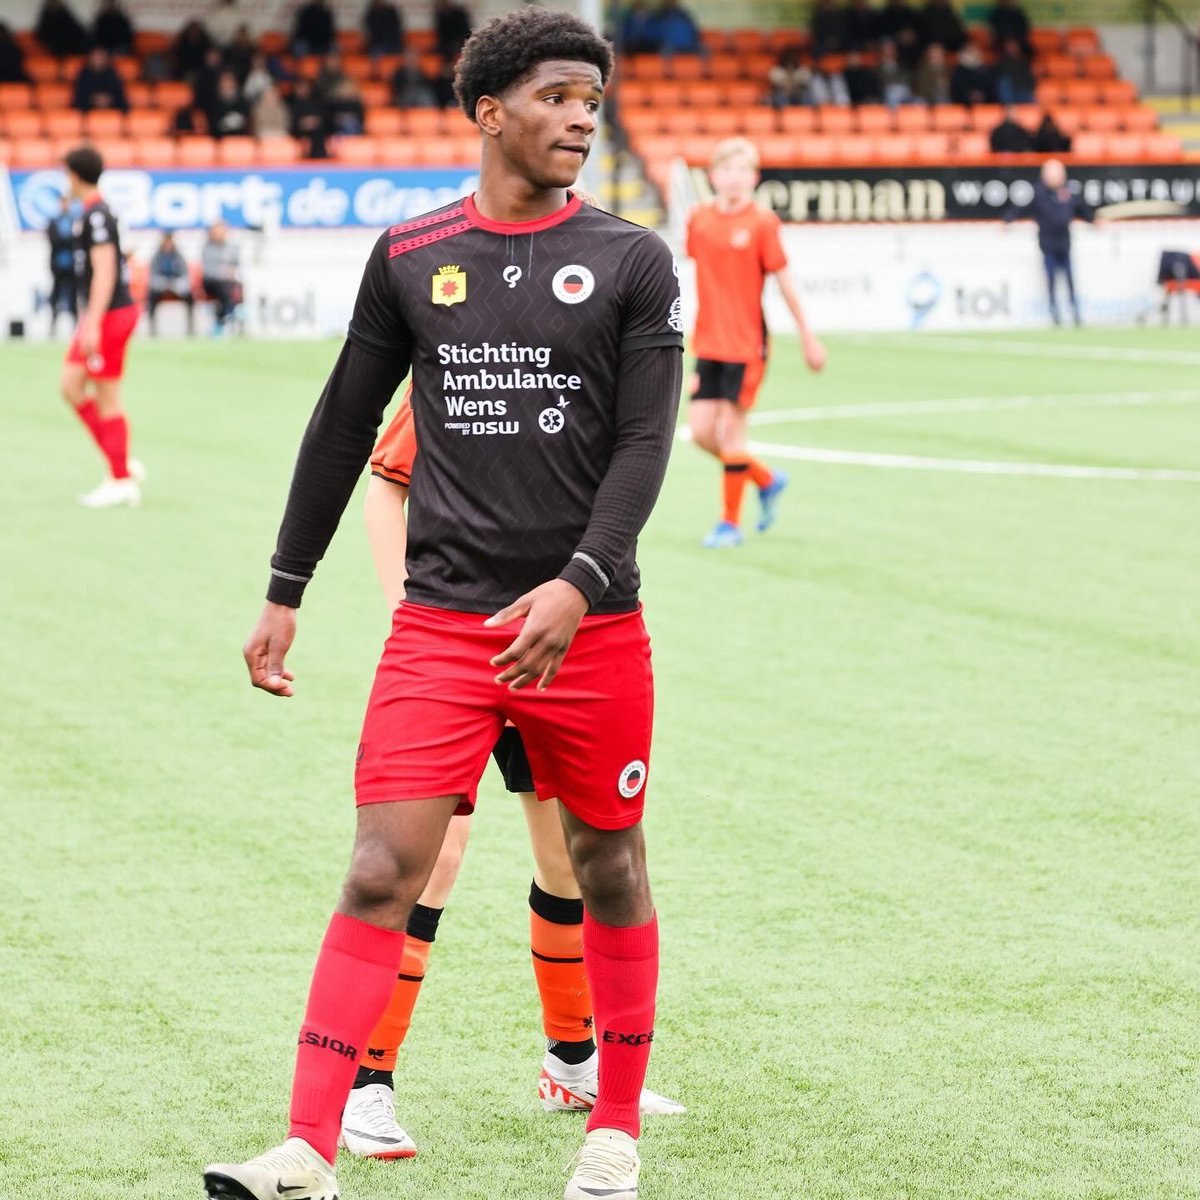 NEWS - Feyenoord signed Excelsior striker Kevin Davis. The physically strong and fast attacker will play for Feyenoord U15. Davis scored 34 goals in 31 games. With Excelsior he became champion of division 2B and reached the national cup final. Welcome and good luck!🔥